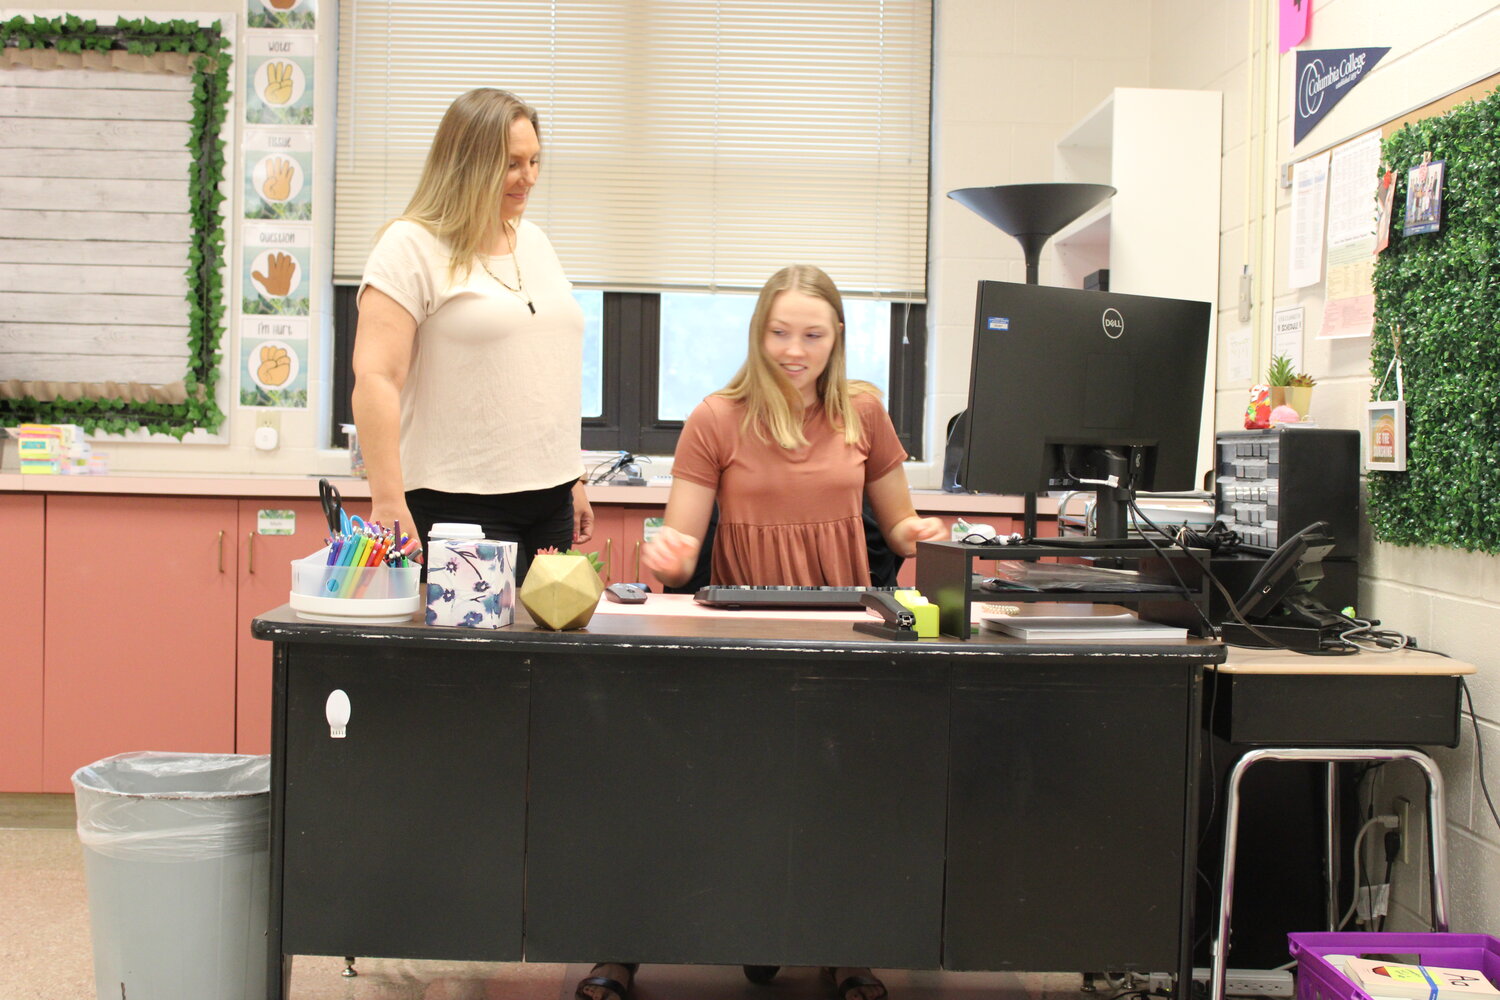 Genessa Gieson looks over the shoulder of her daughter, Hope Roetemeyer, as Roetemeyer works on her classroom computer. Both are first year teachers in the Warren County R-III school district this year.